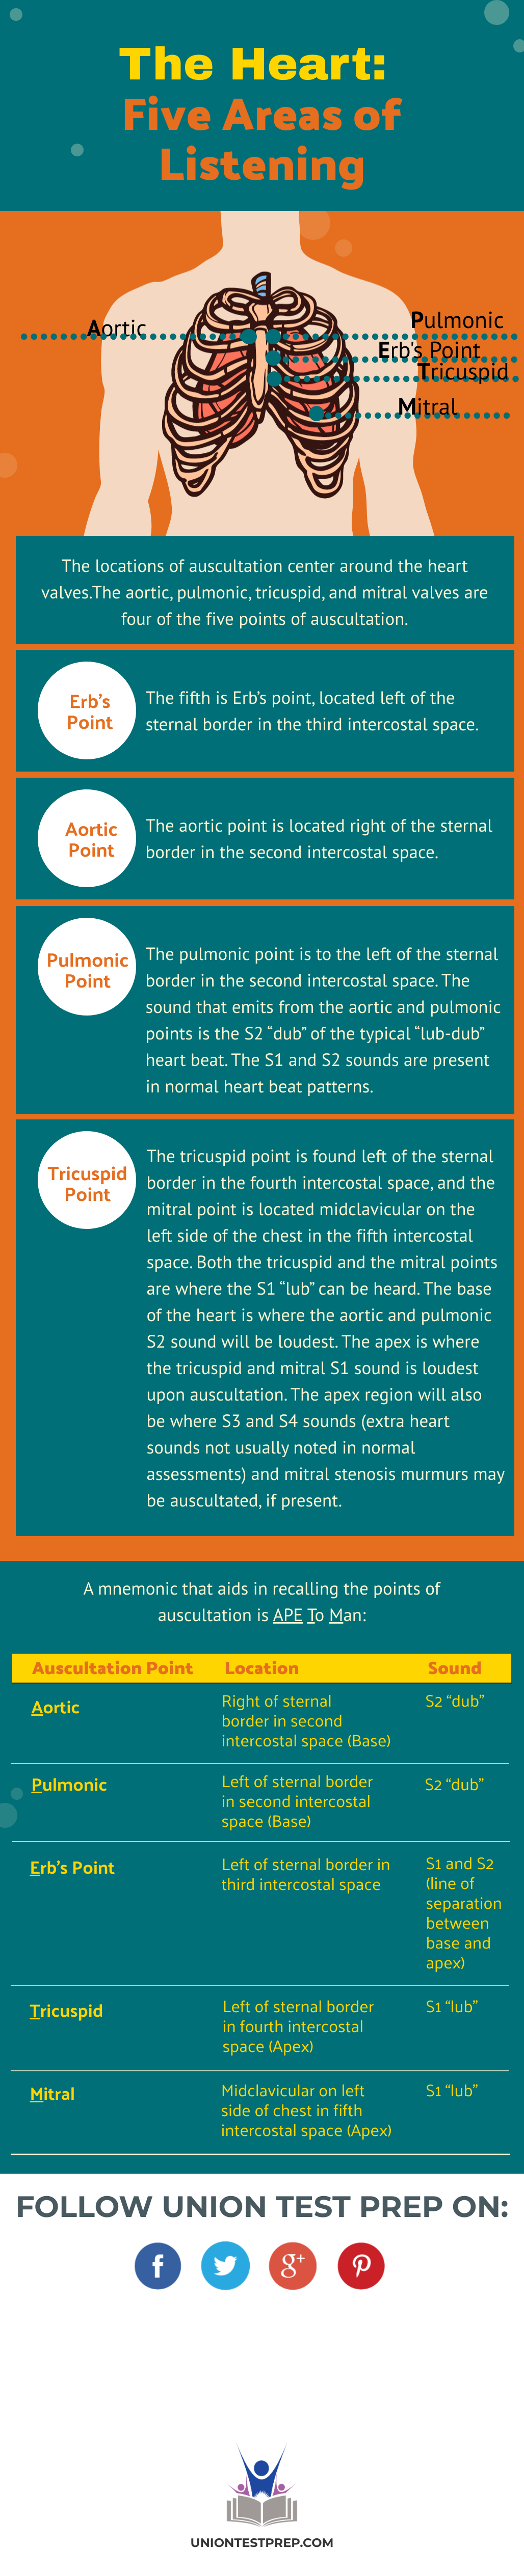 The Five Areas For Heart Auscultation